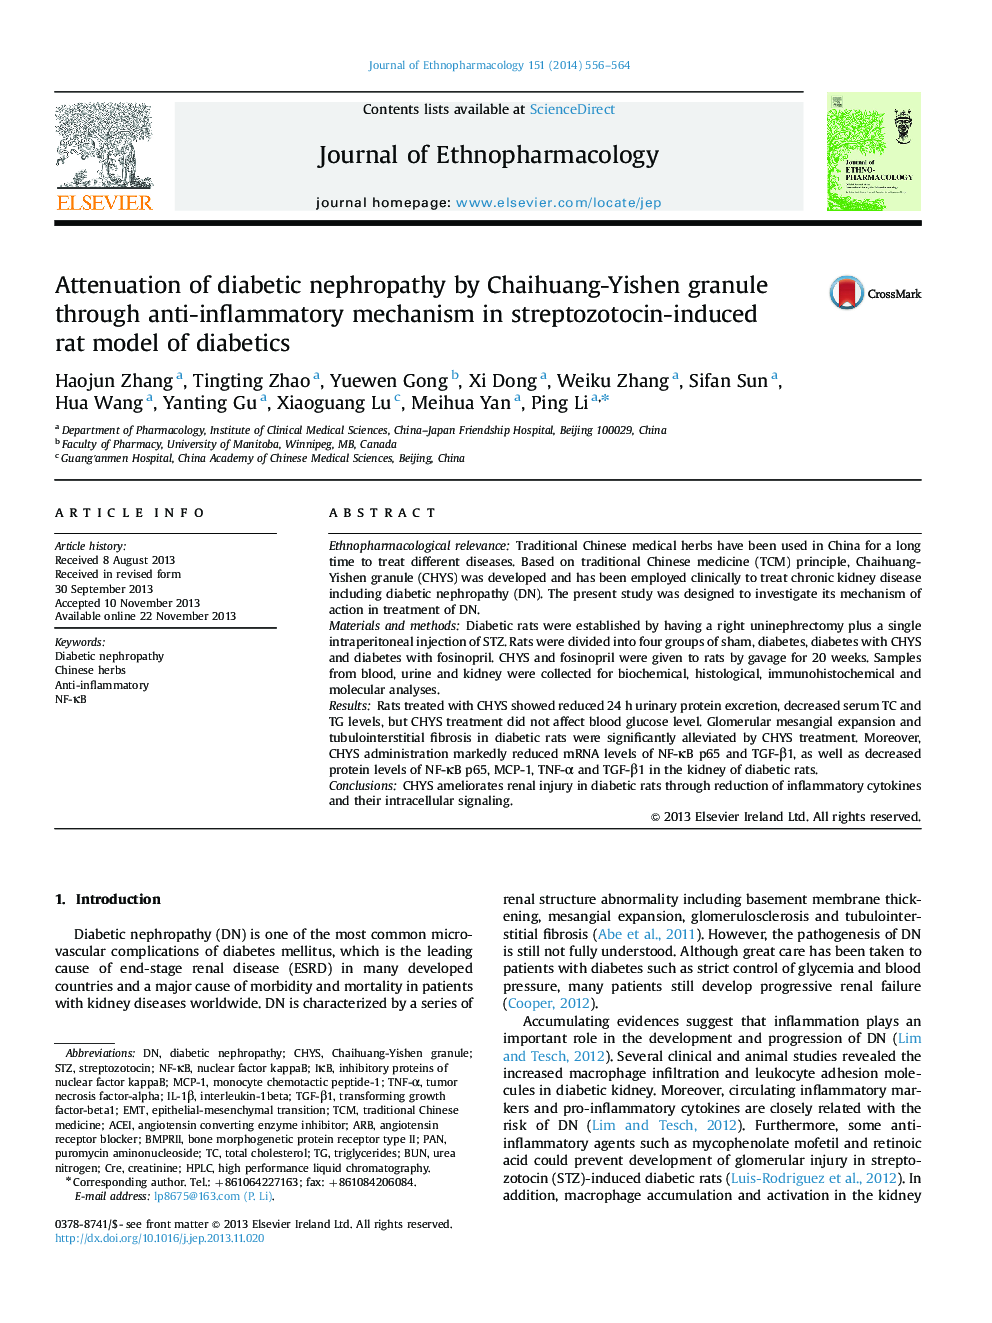 Attenuation of diabetic nephropathy by Chaihuang-Yishen granule through anti-inflammatory mechanism in streptozotocin-induced rat model of diabetics